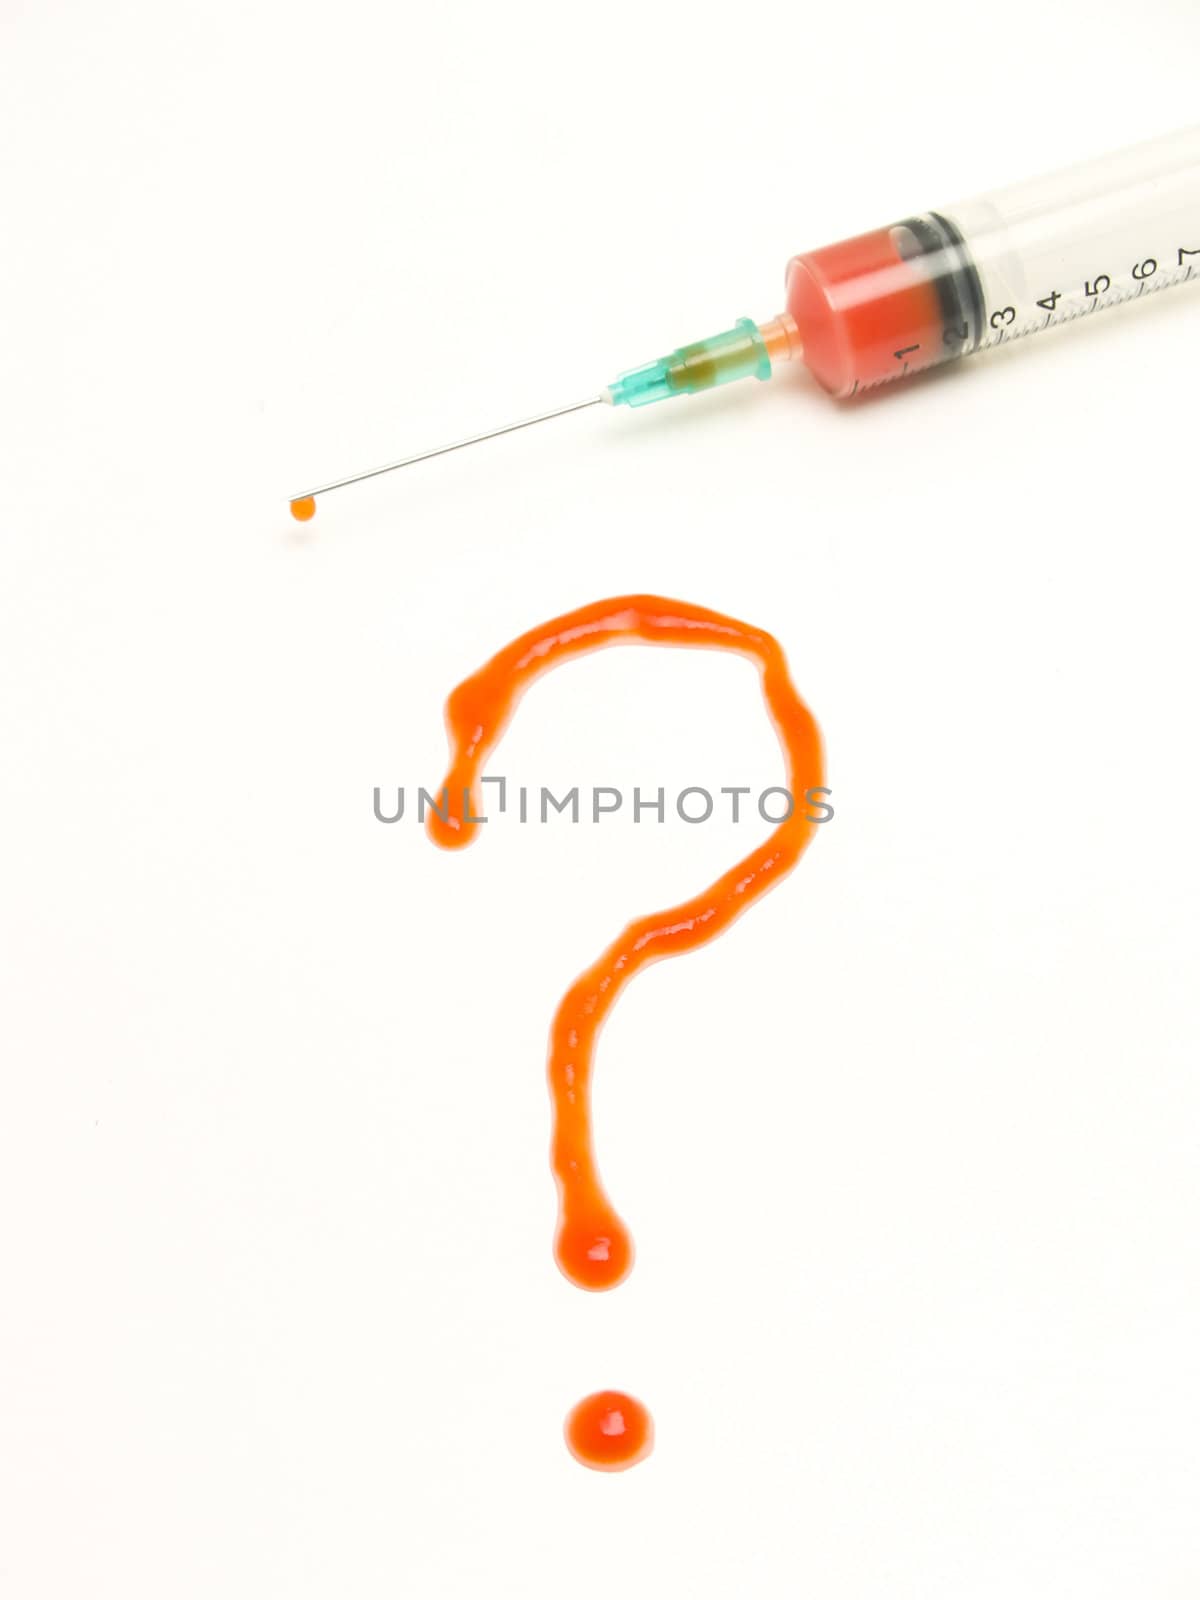 Syringe with blood by lauria